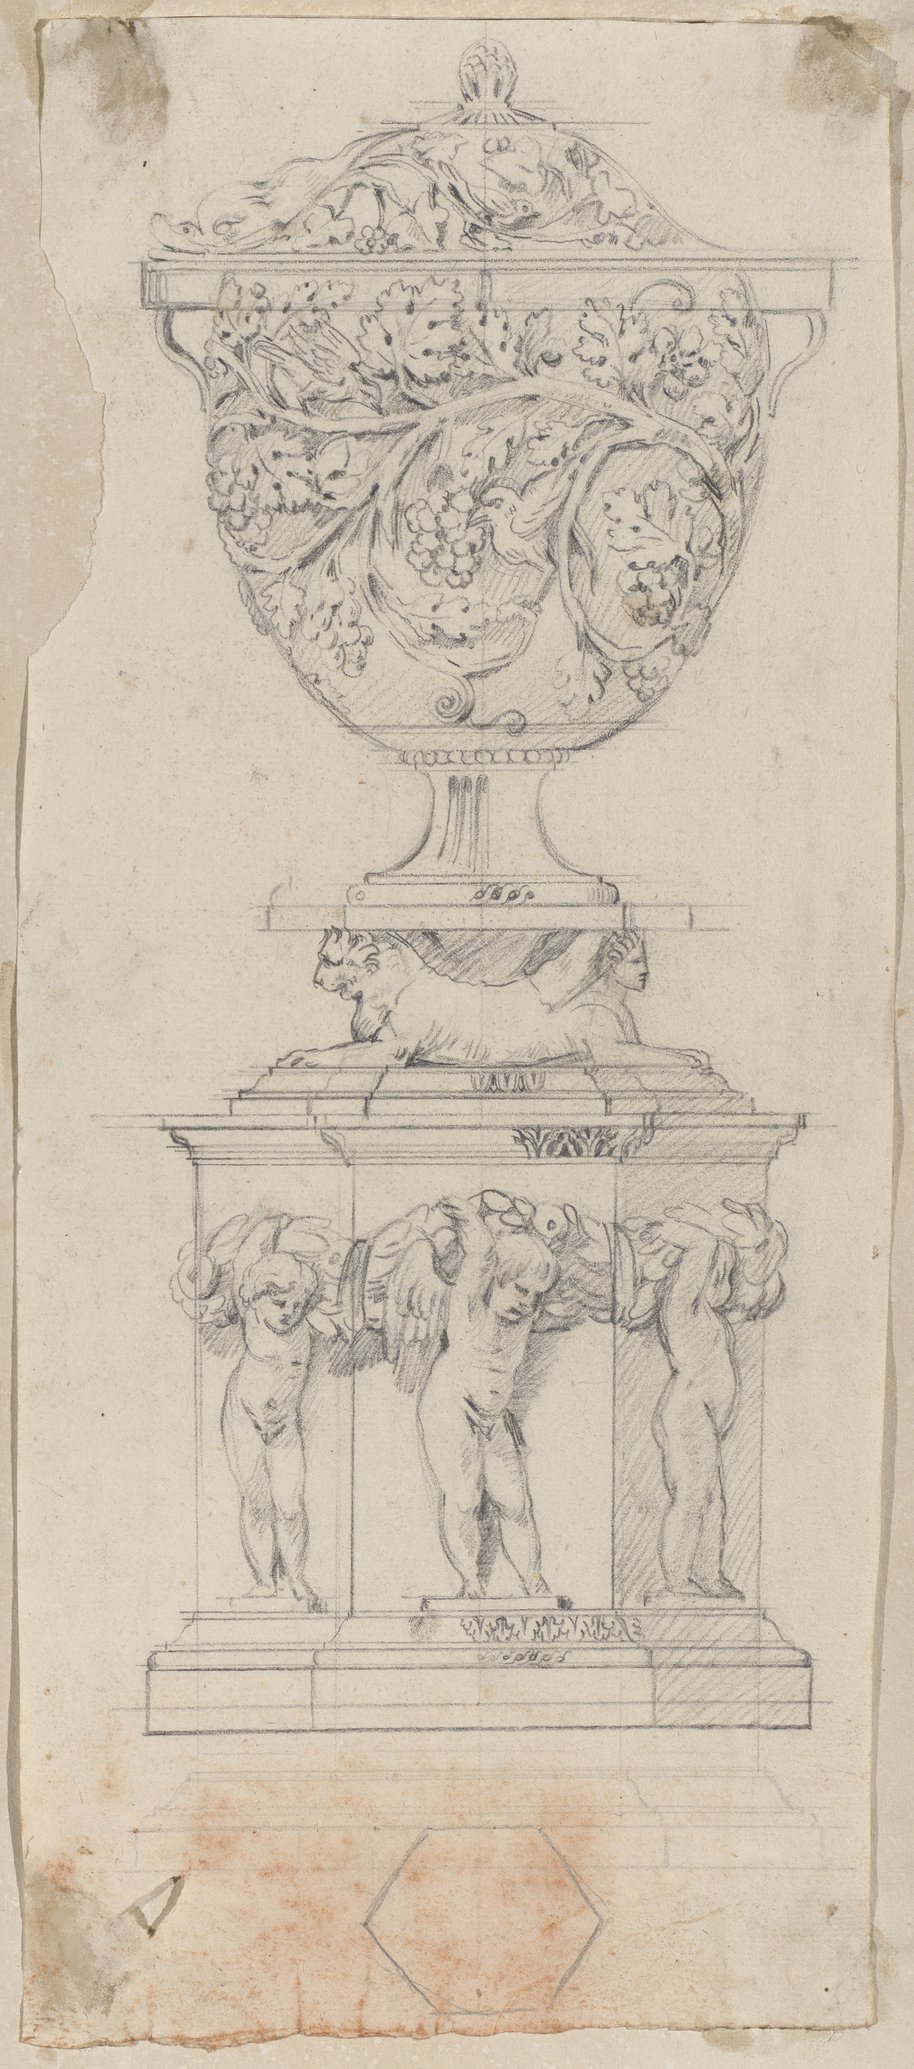 Incident light image. Vase with vine decoration, drawn in black chalk atop a hexagonal base decorated with Erotes bearing garlands